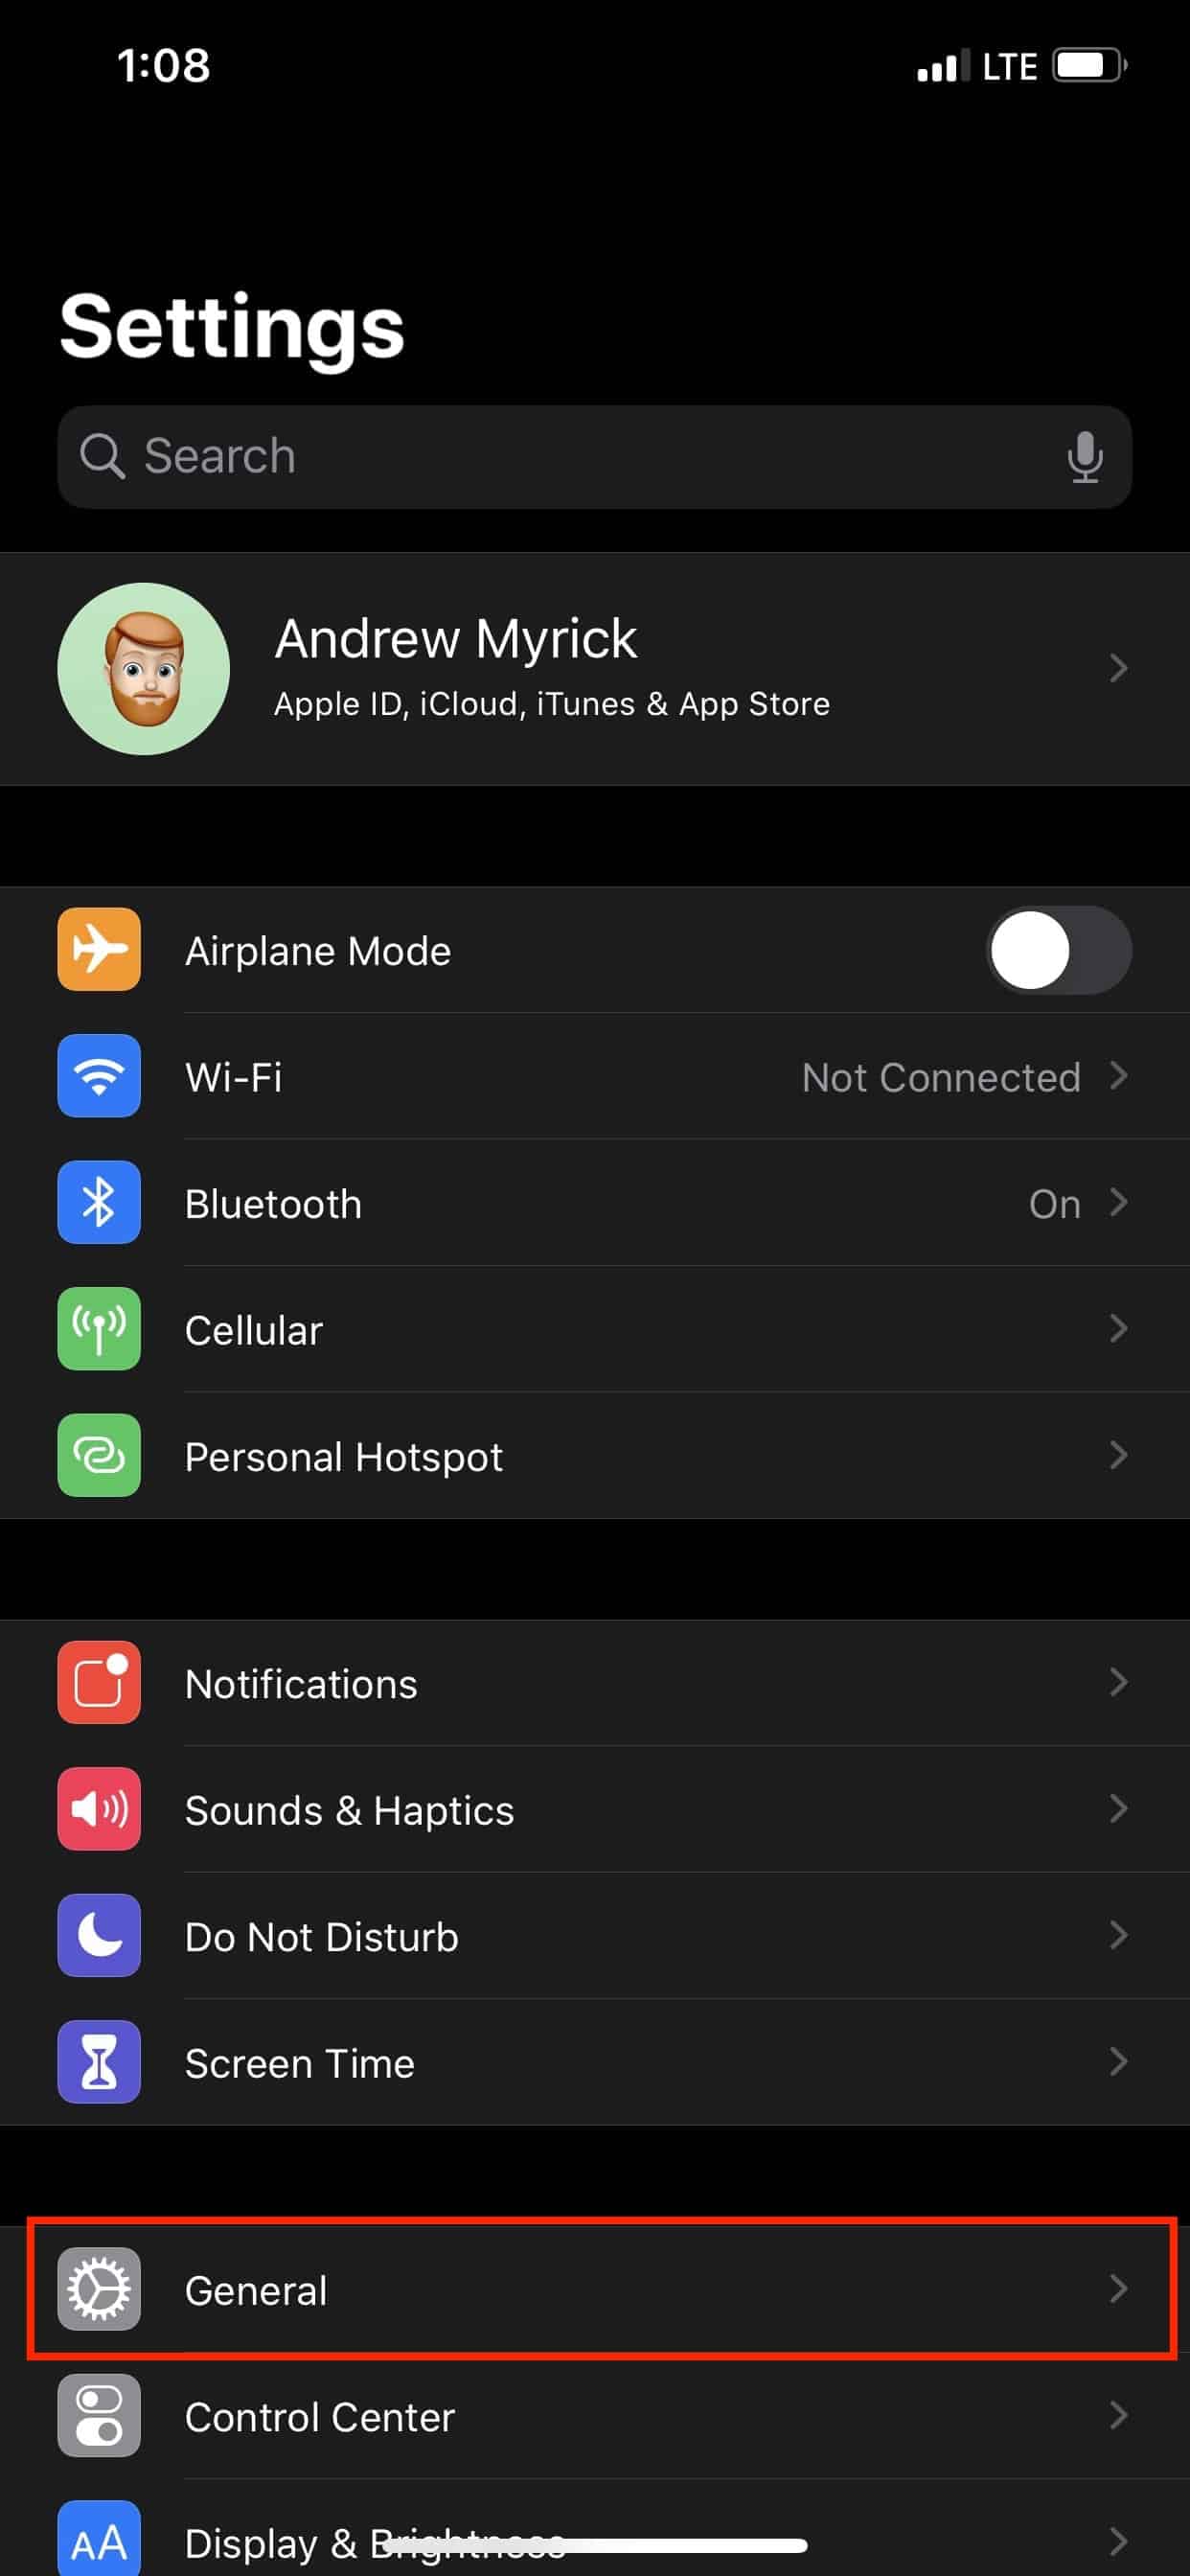 Raw Flare Less AirPods Pro not working? Here are some tips and tricks - AppleToolBox